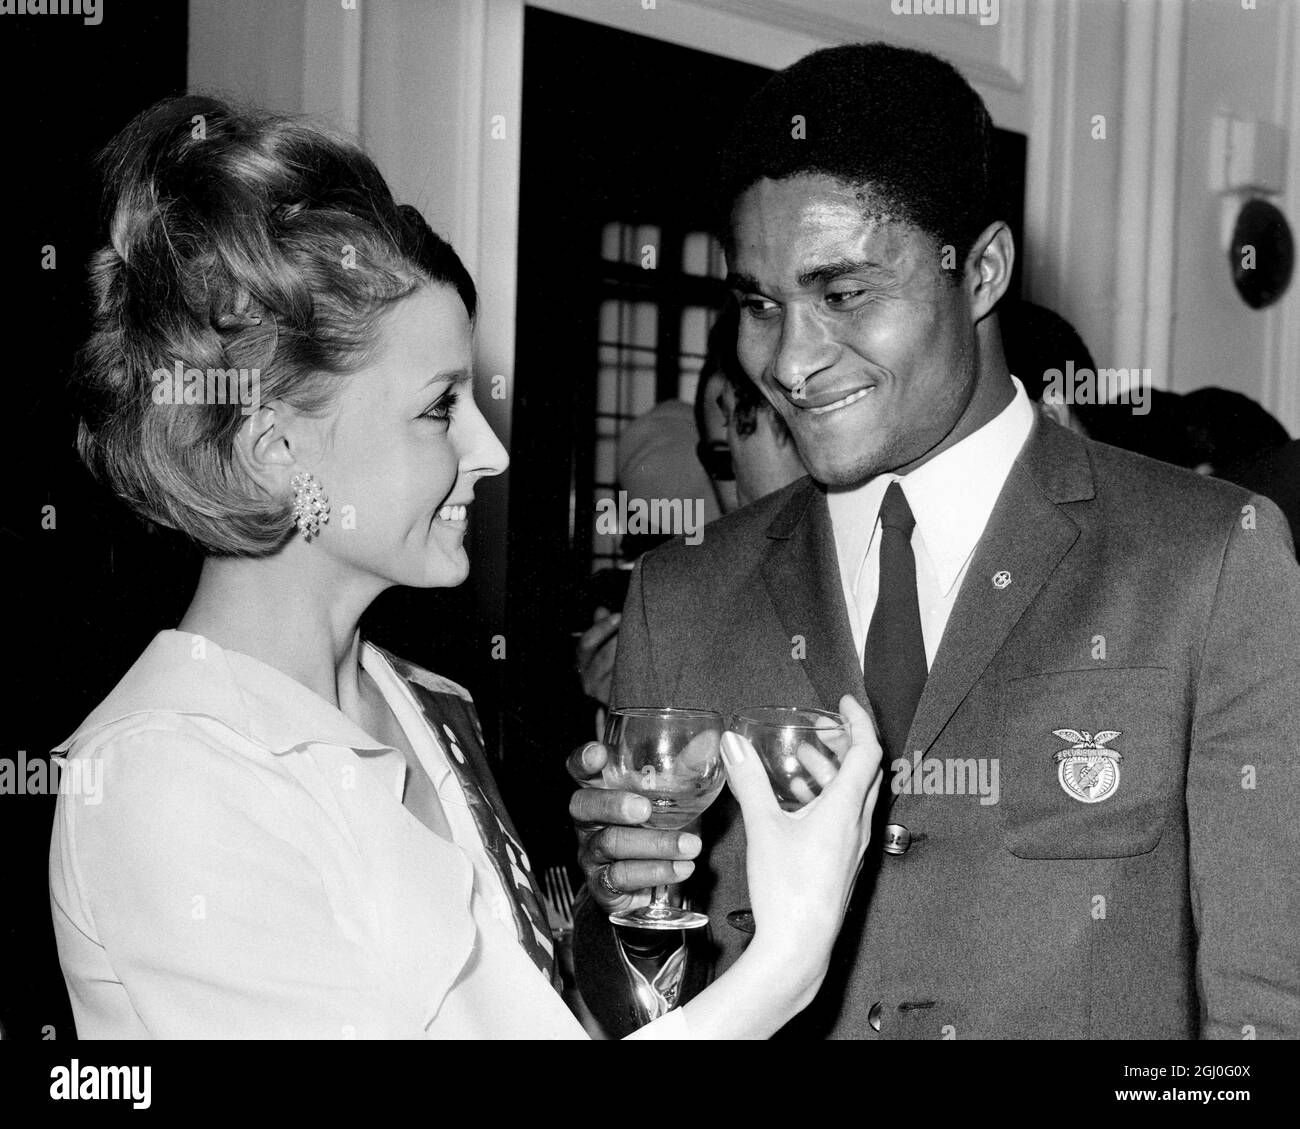 Eusebio (right) Benfica's star player, takes a consolation drink after his  team was defeated 4-1 by Manchester United in the European Cup Final. Photo  shows Eusebio with Patricia Neane of Stockwell, who